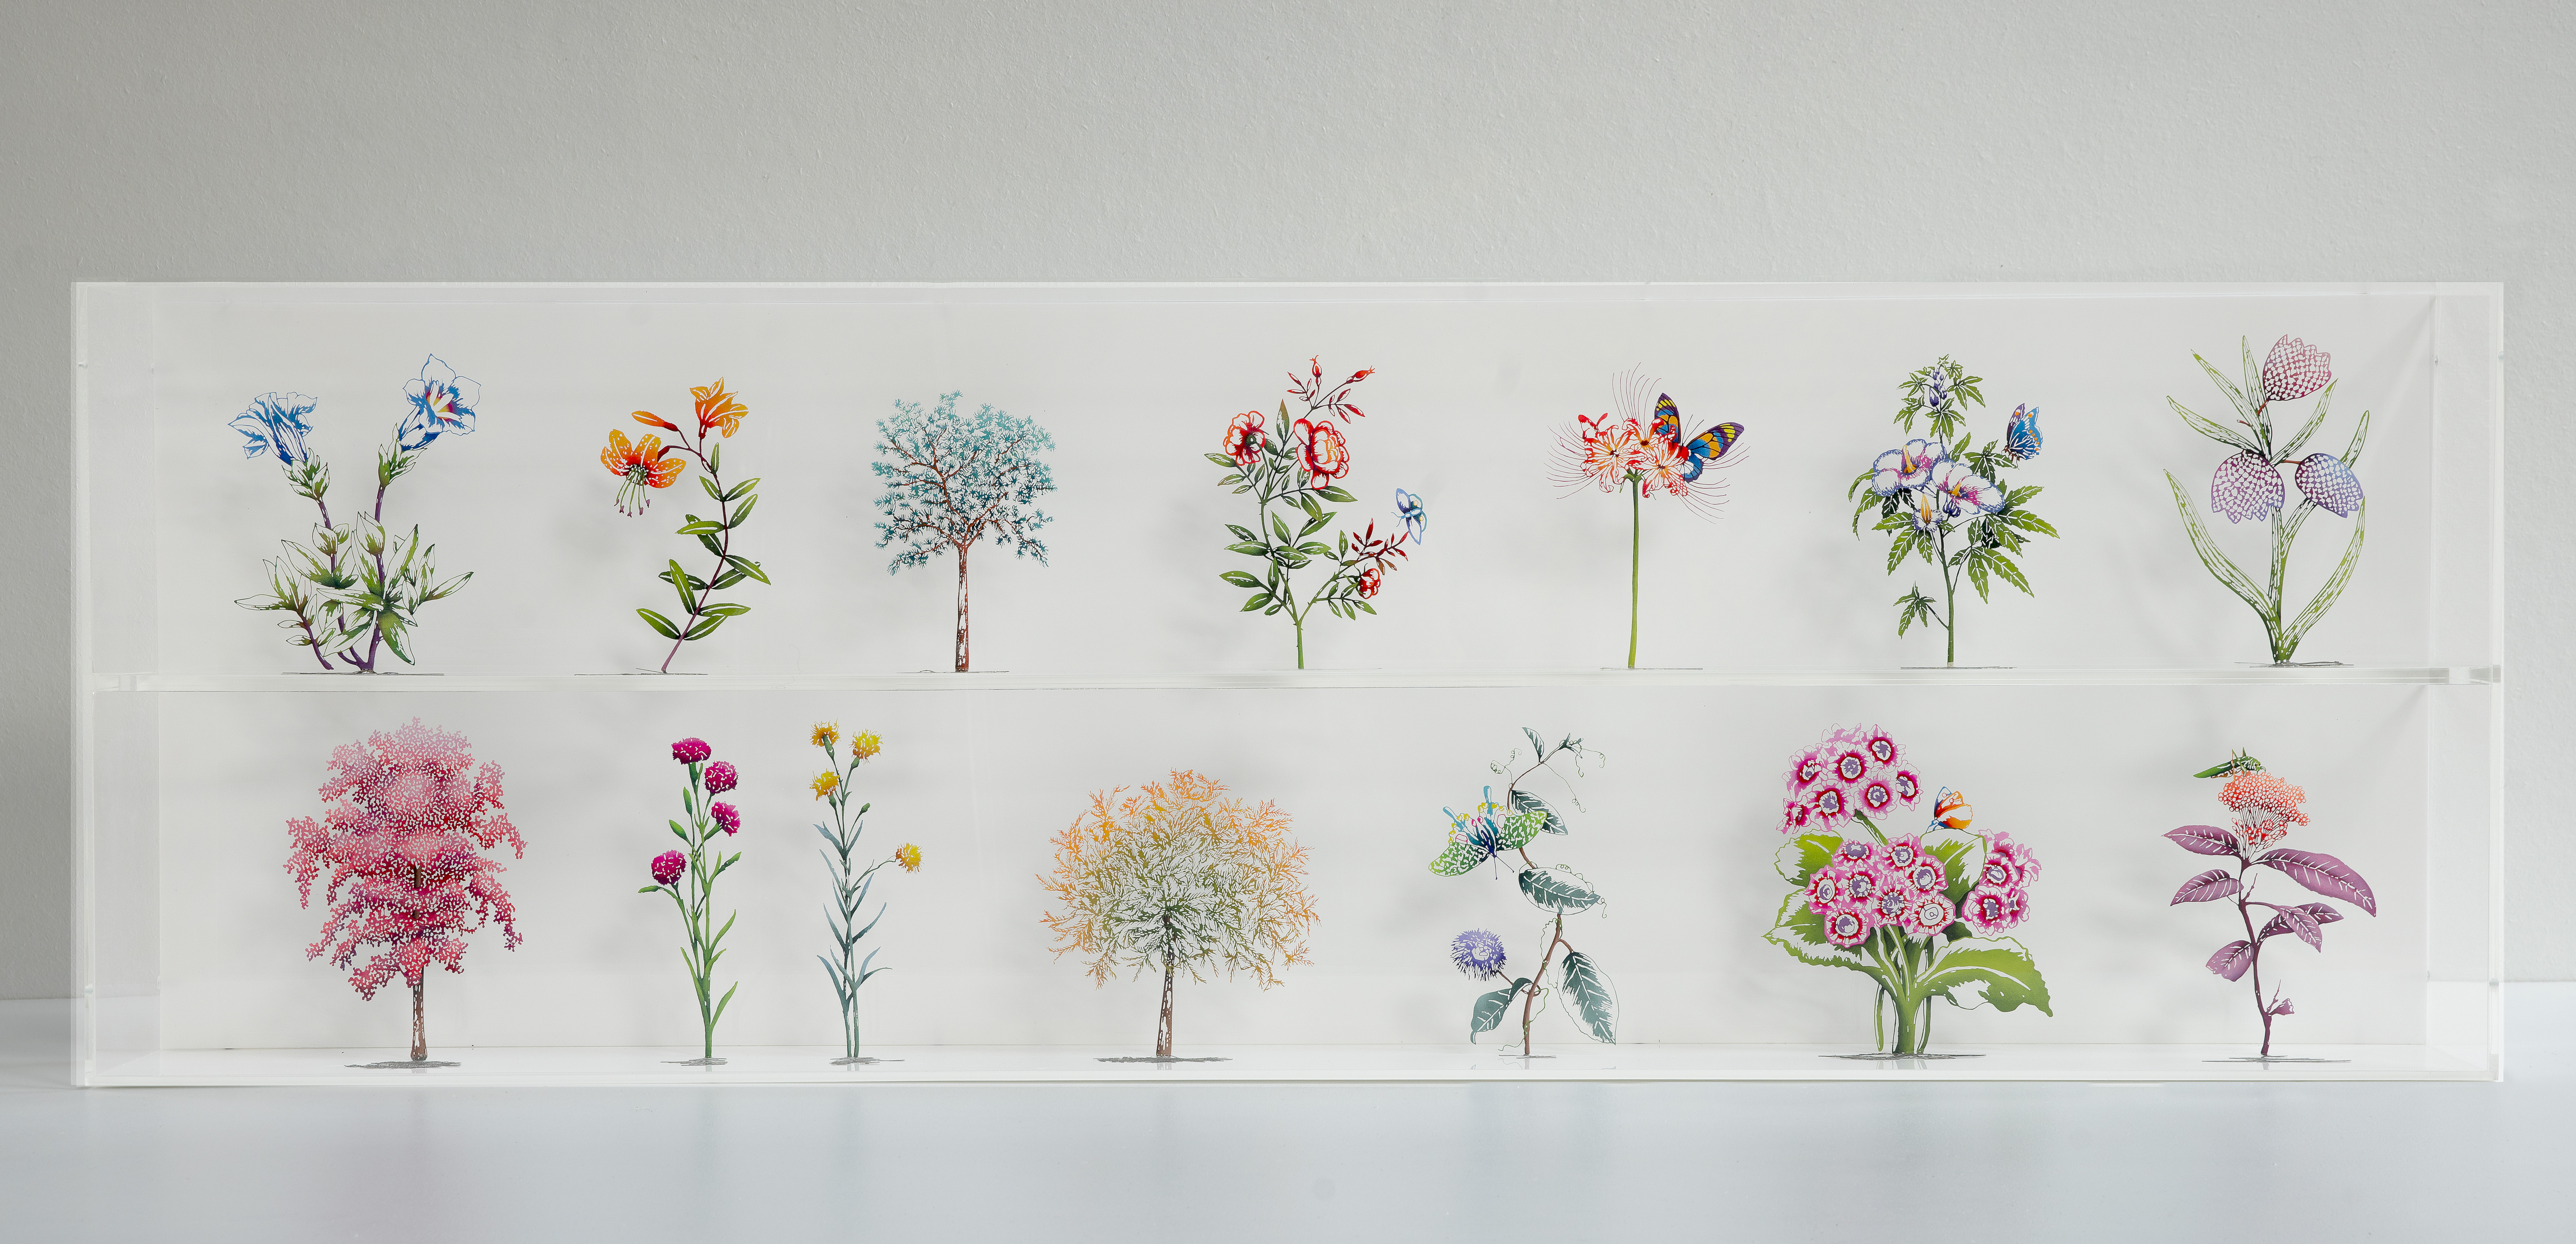 Artwork showing 14 hand painted stainless steel botanical illustrations. 